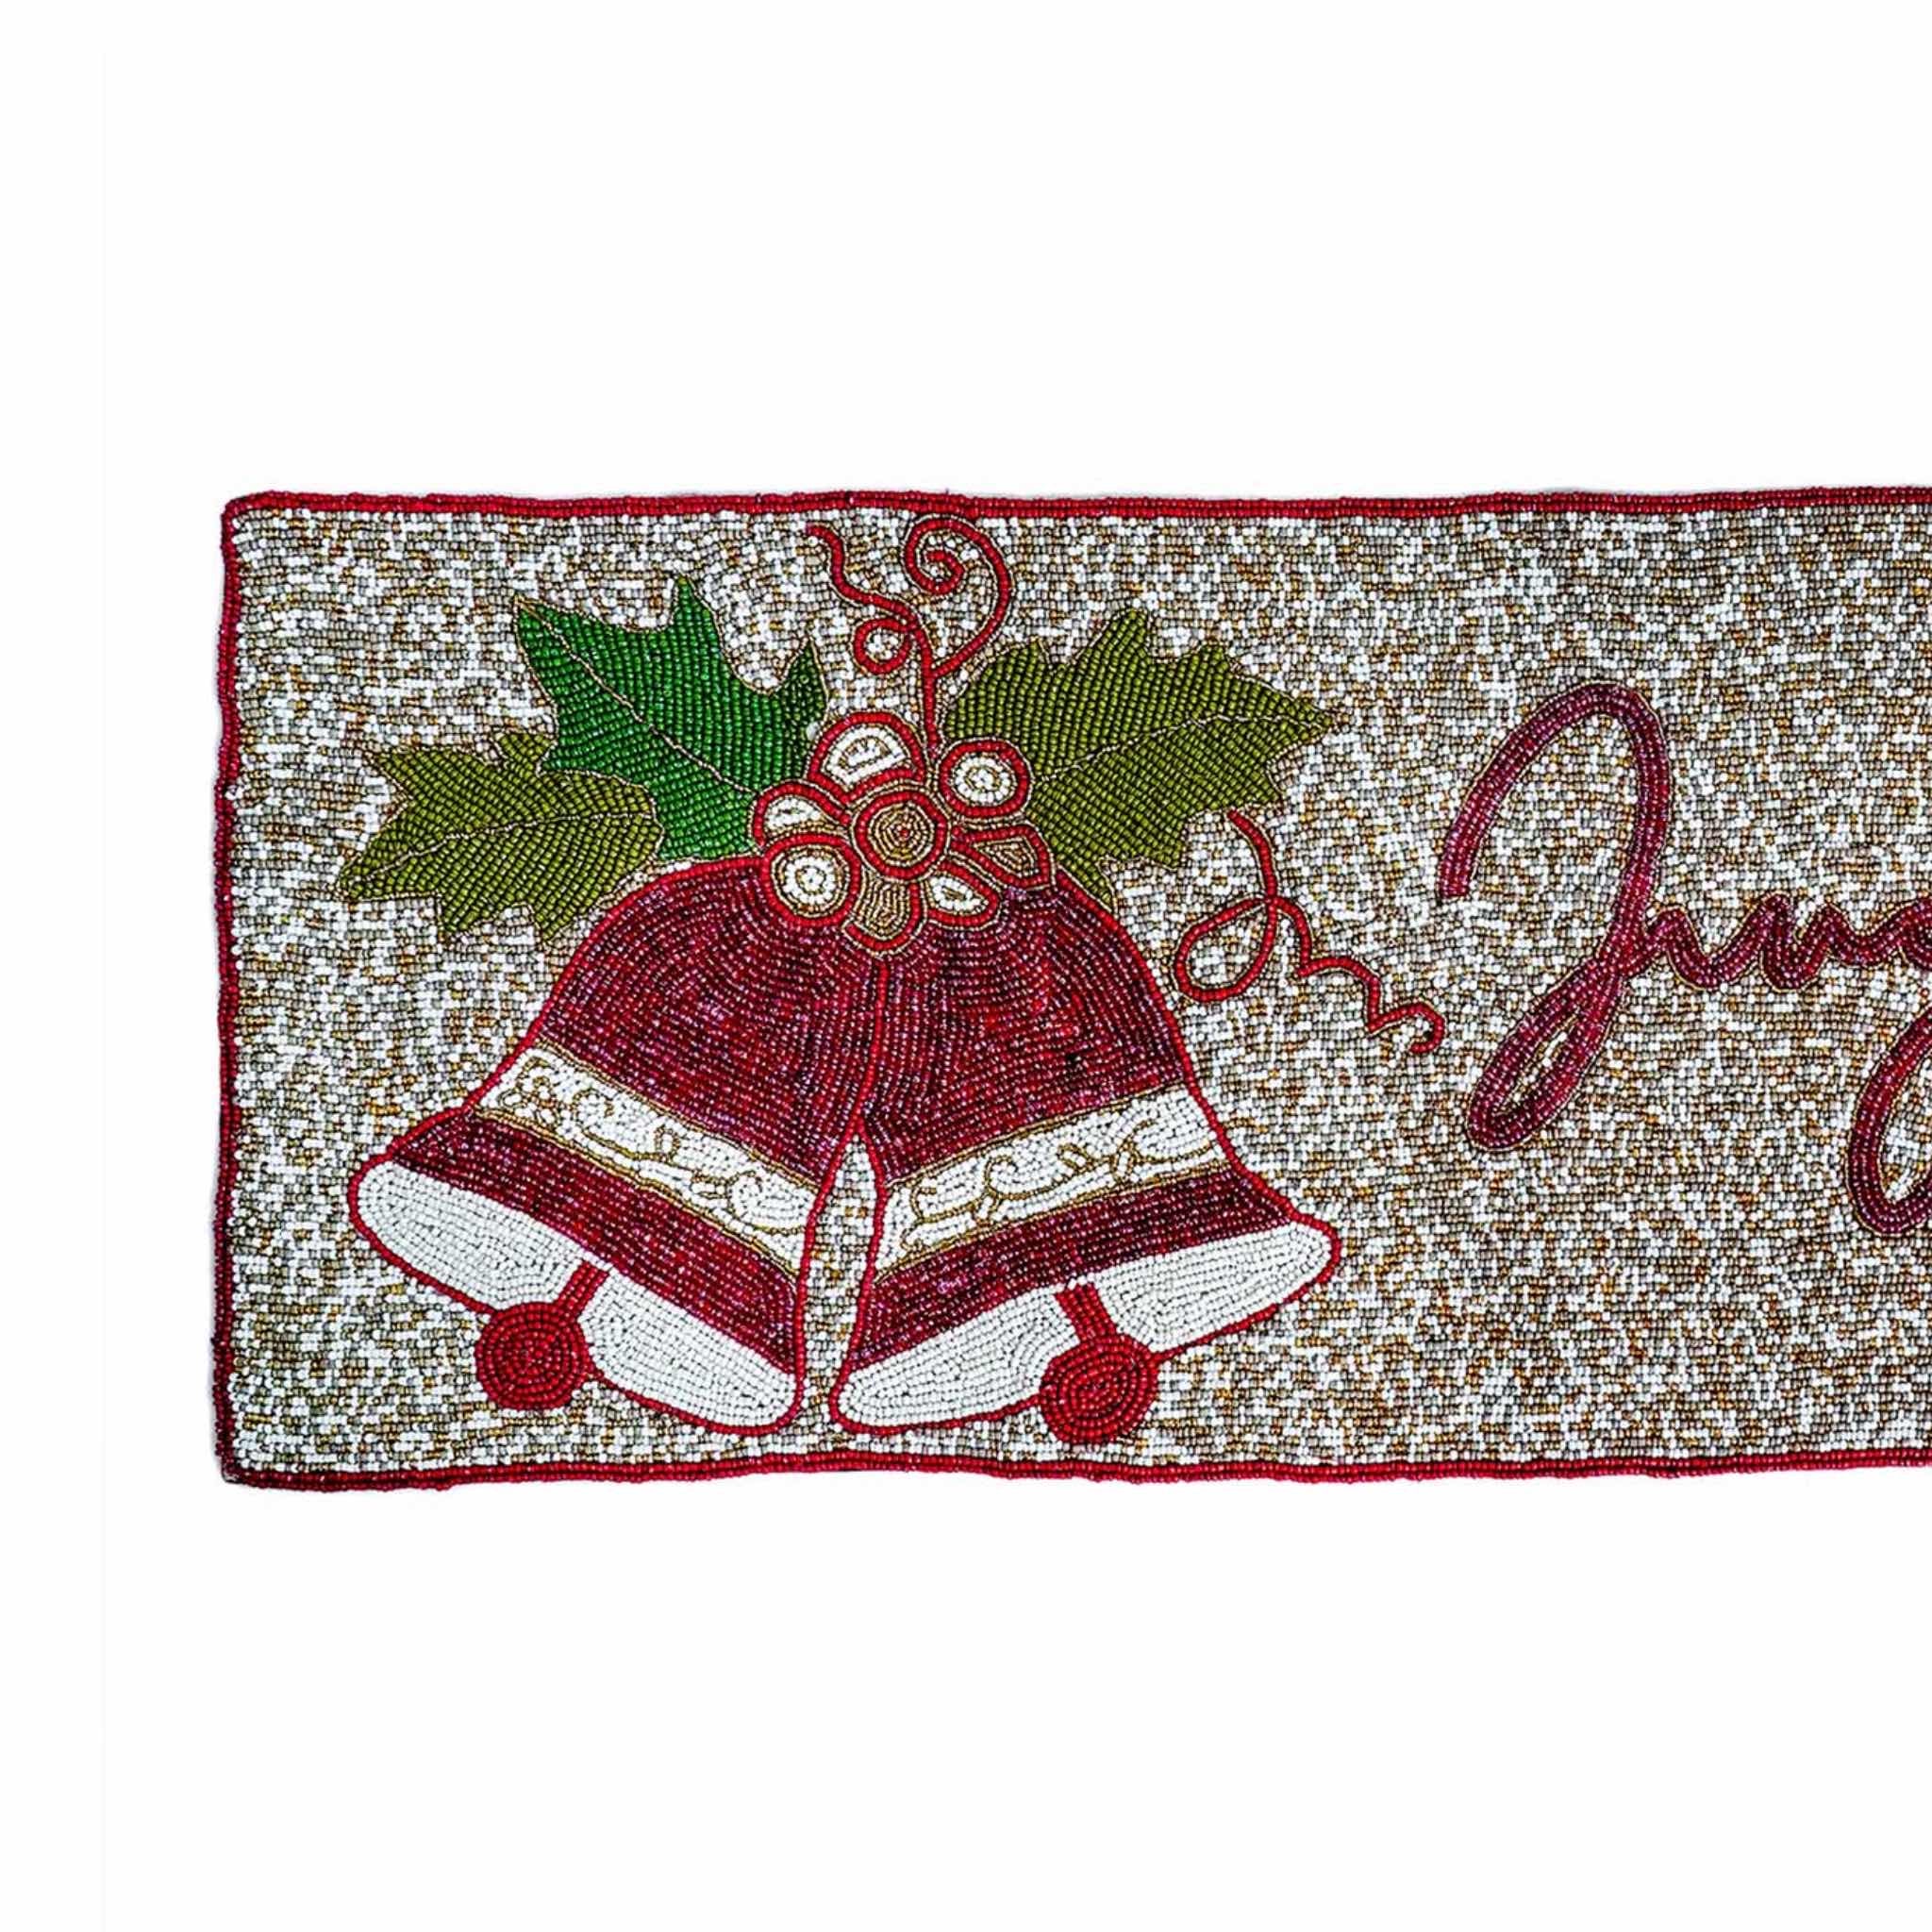 Jingle All the Way Bead Embroidered Table Runner in Red, White & Green